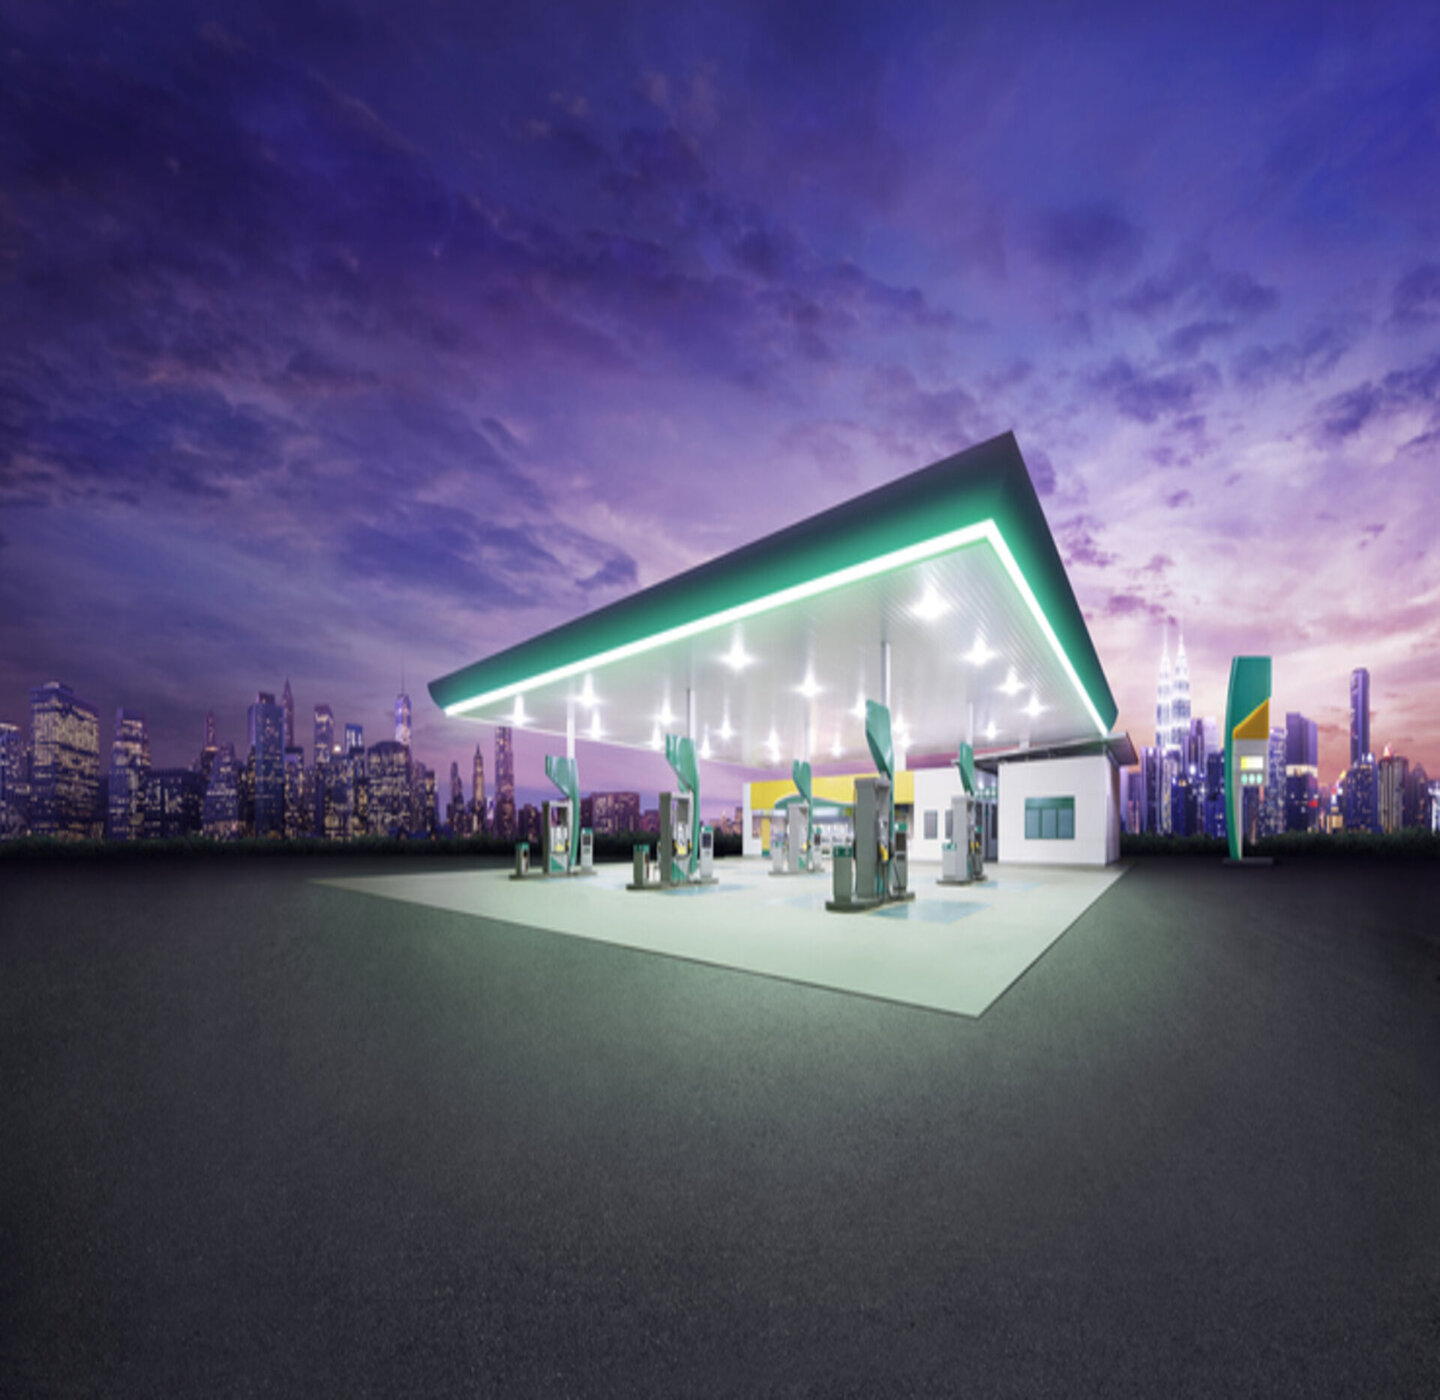 Glowing forecourt image with a city skyline in the background at night.